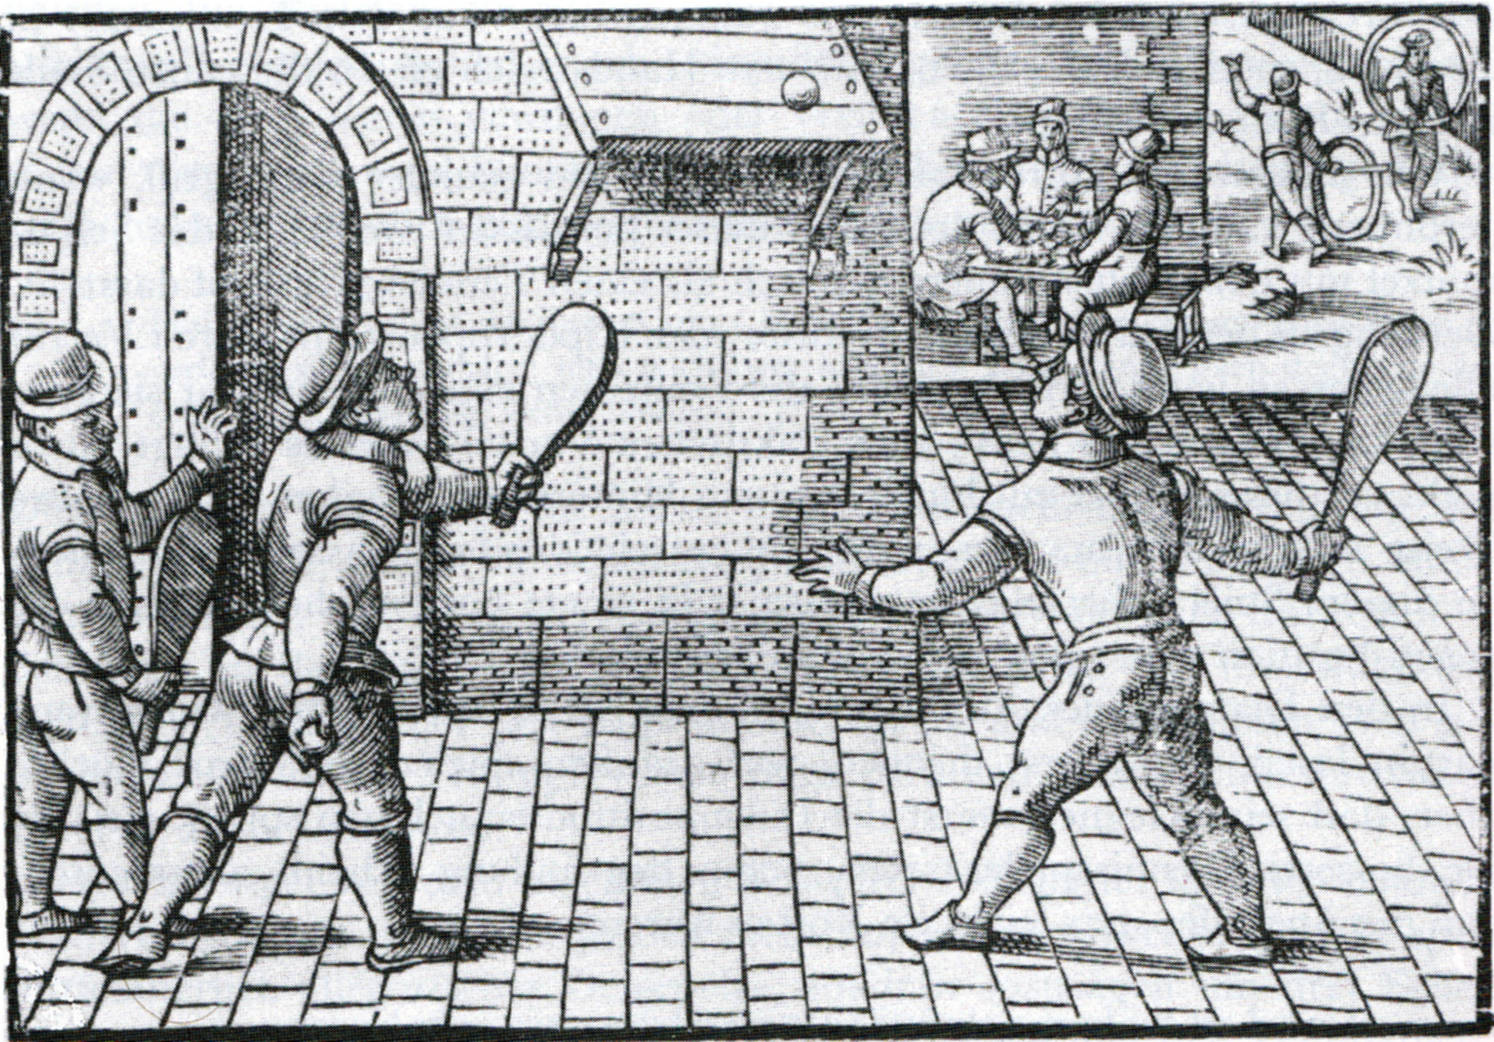 Copper engraving of a game of Tennis in France, in the 16. century. From the series "Children games". Bibliothèque Nationale, Cabinet des Estampes, Paris.